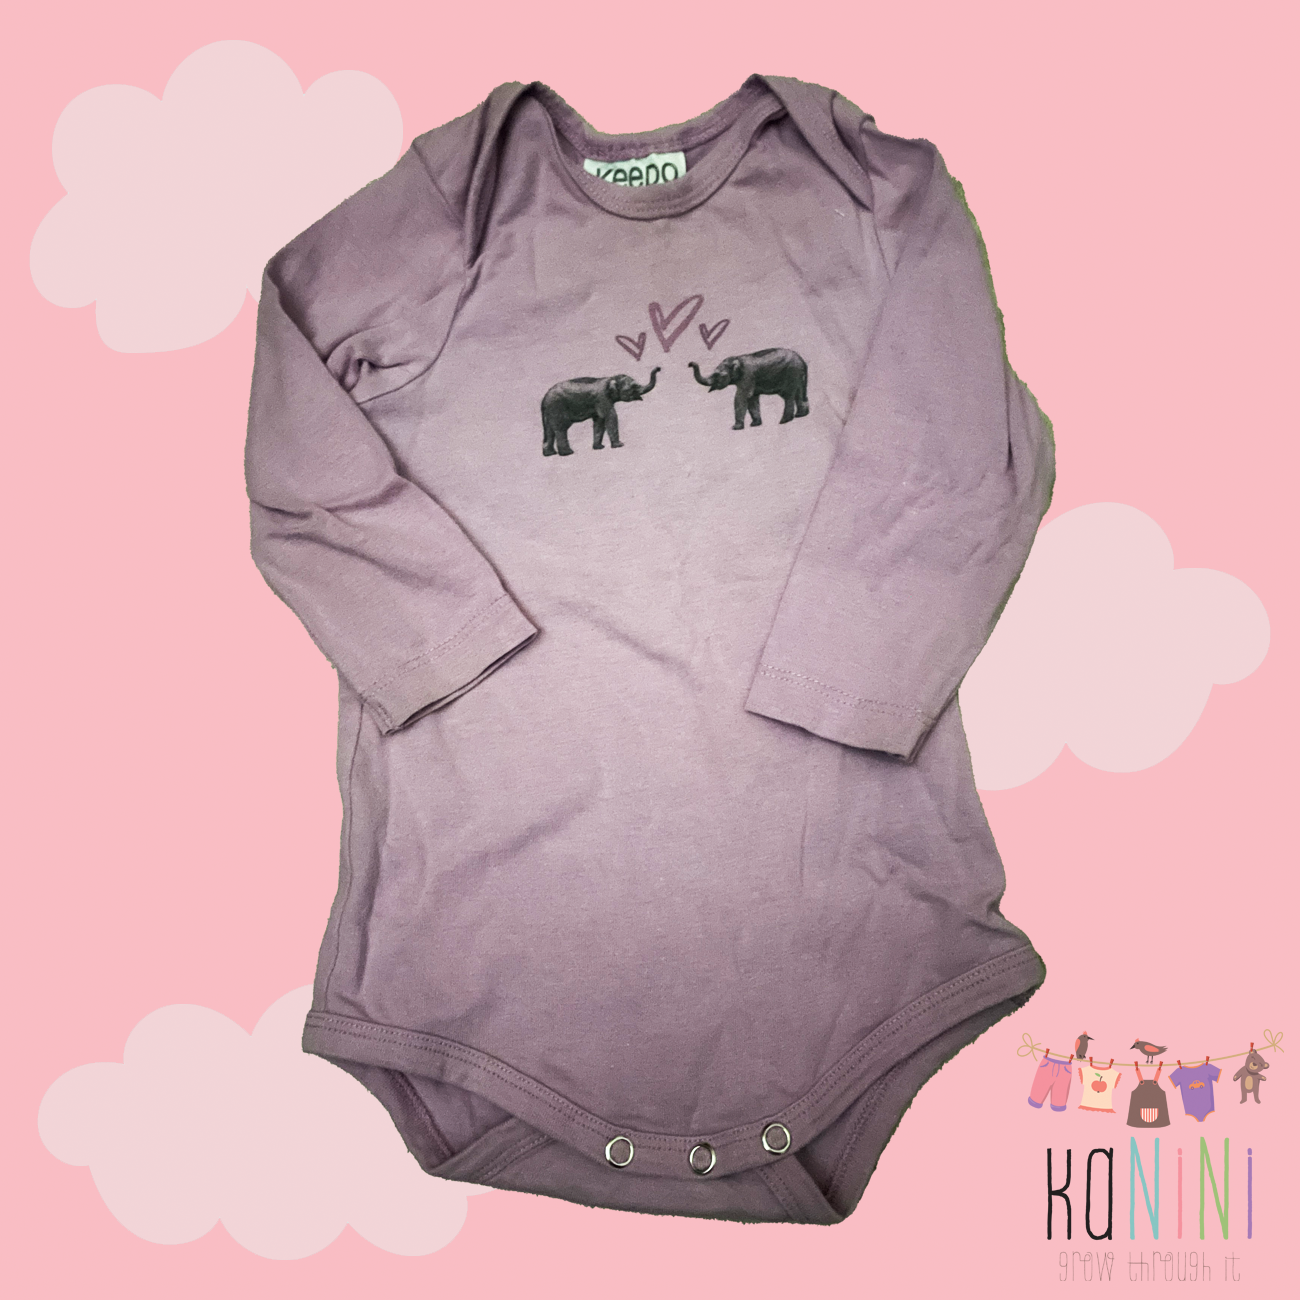 Featured image for “Keedo 6 - 12 Months Girls Long Sleeve Romper”